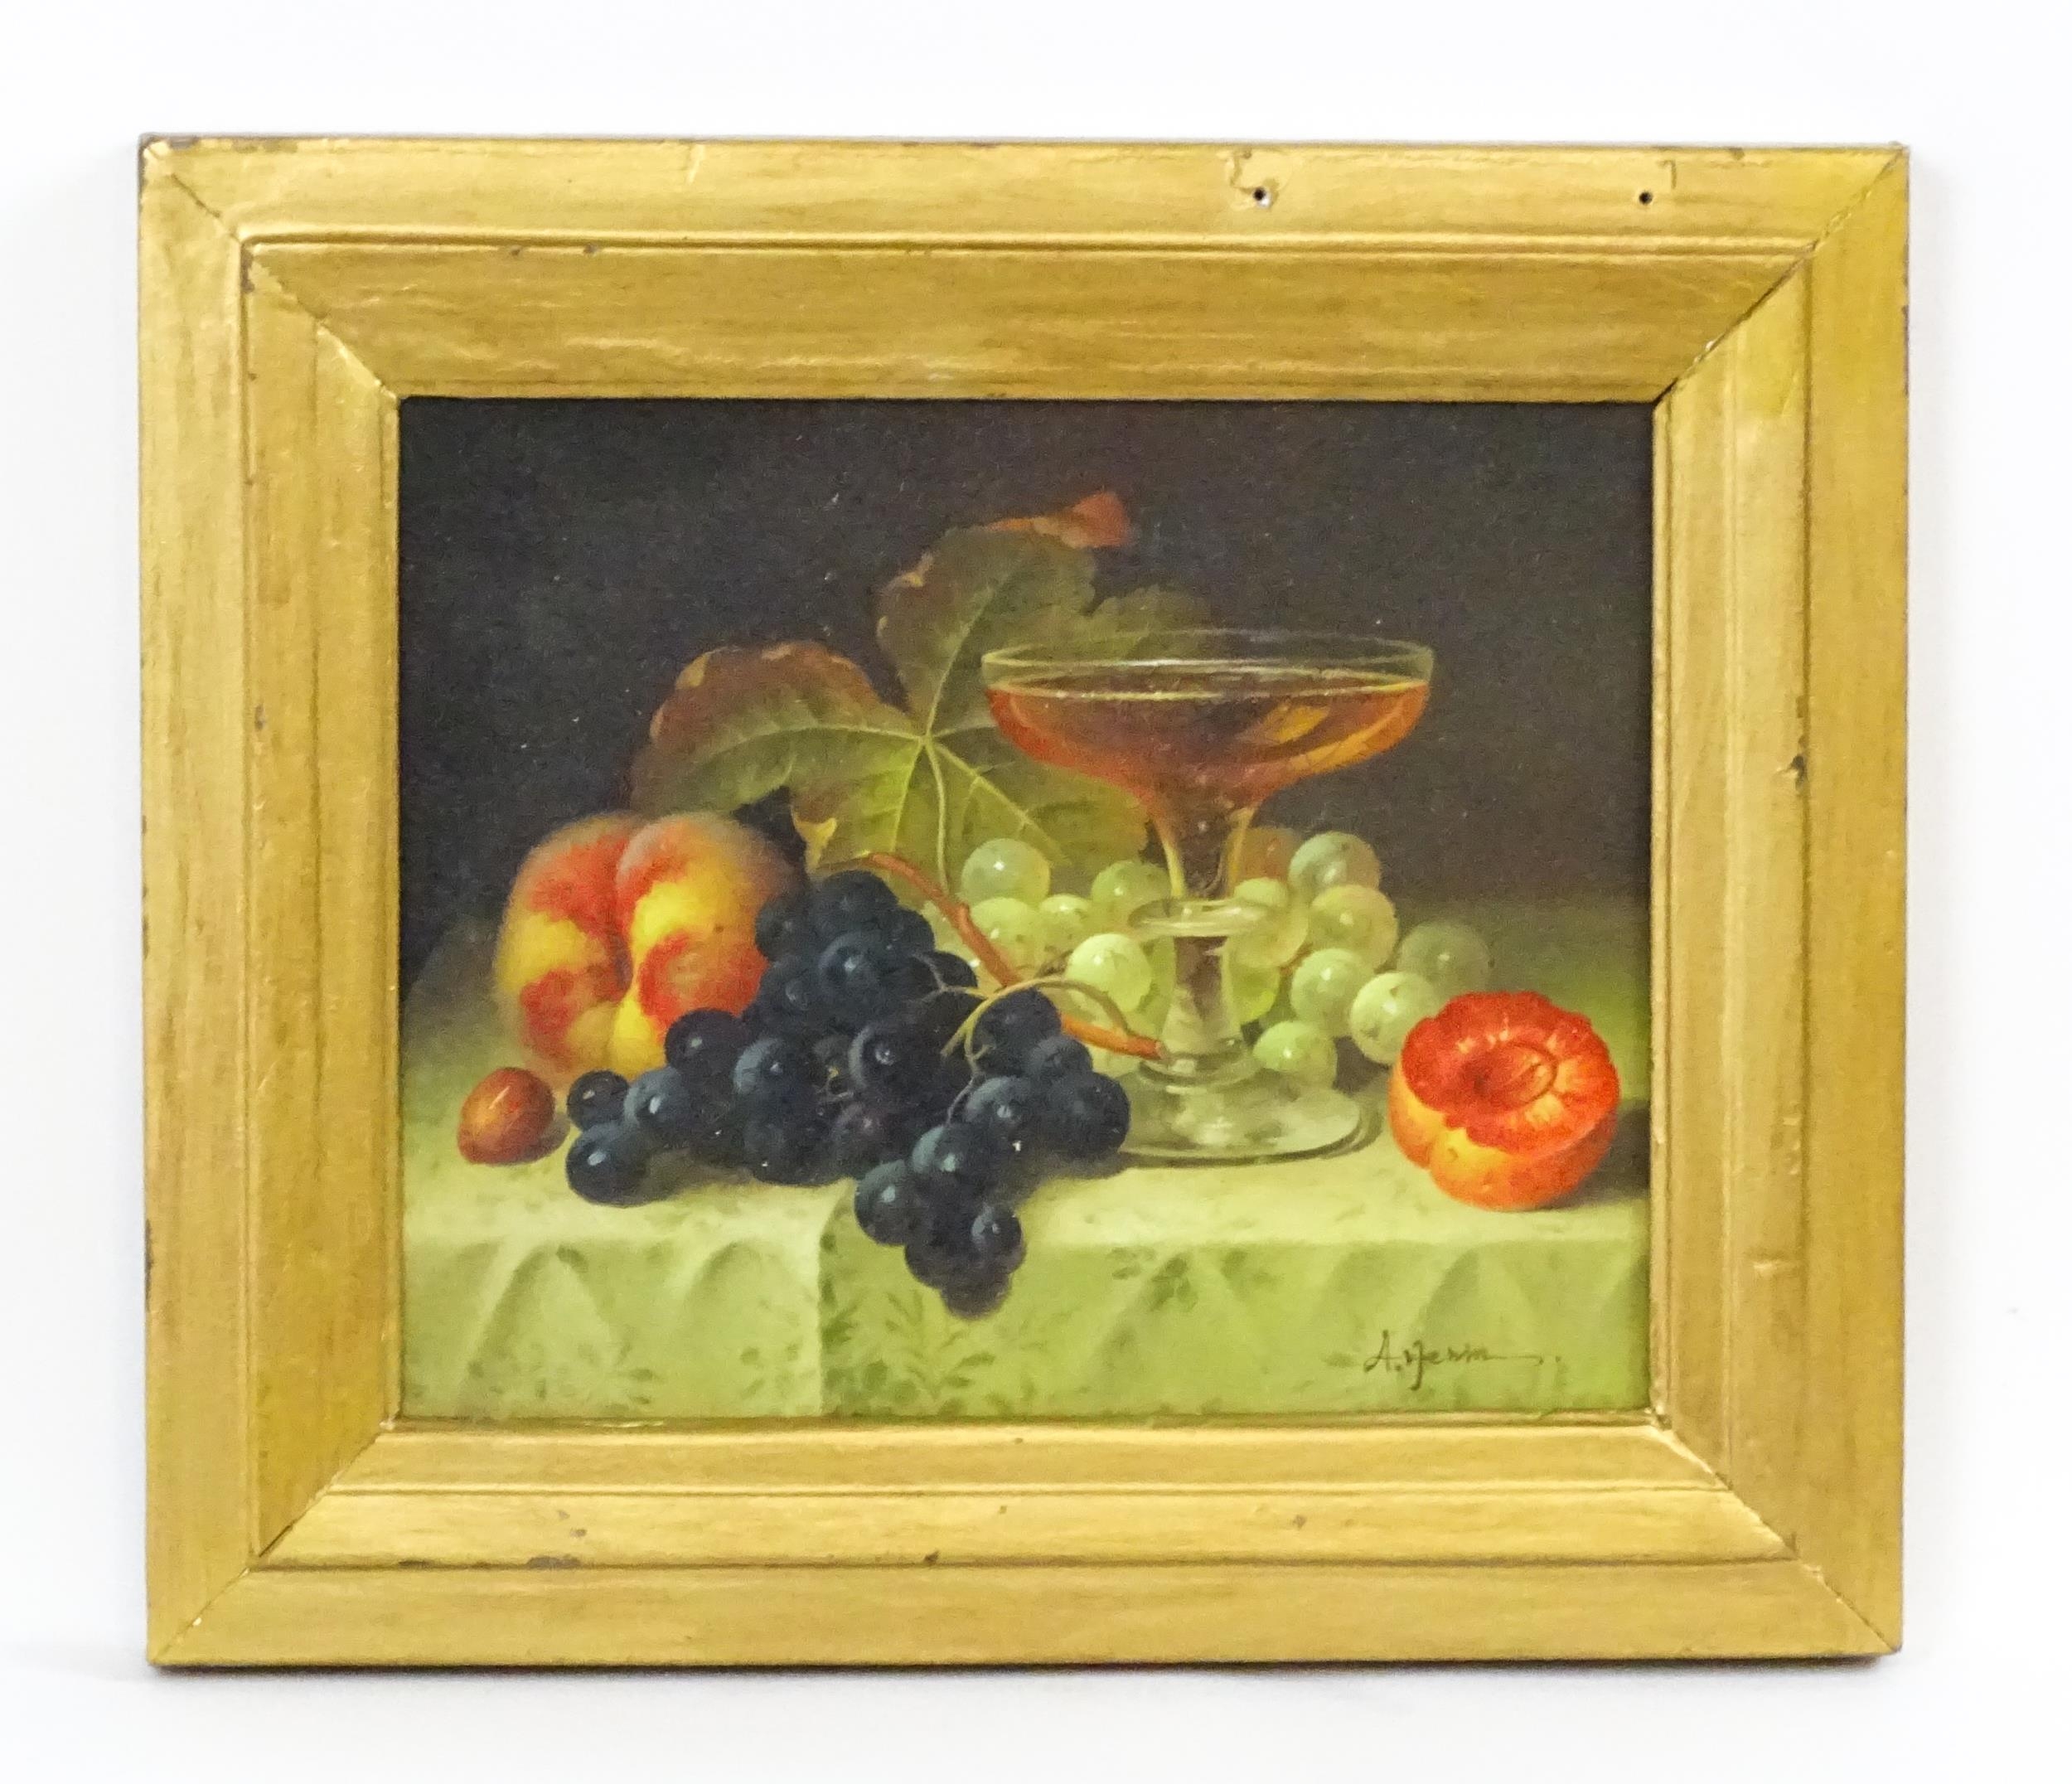 Artemis, 20th century, Oil on panel, A still life study with fruit and a glass on a table. Signed